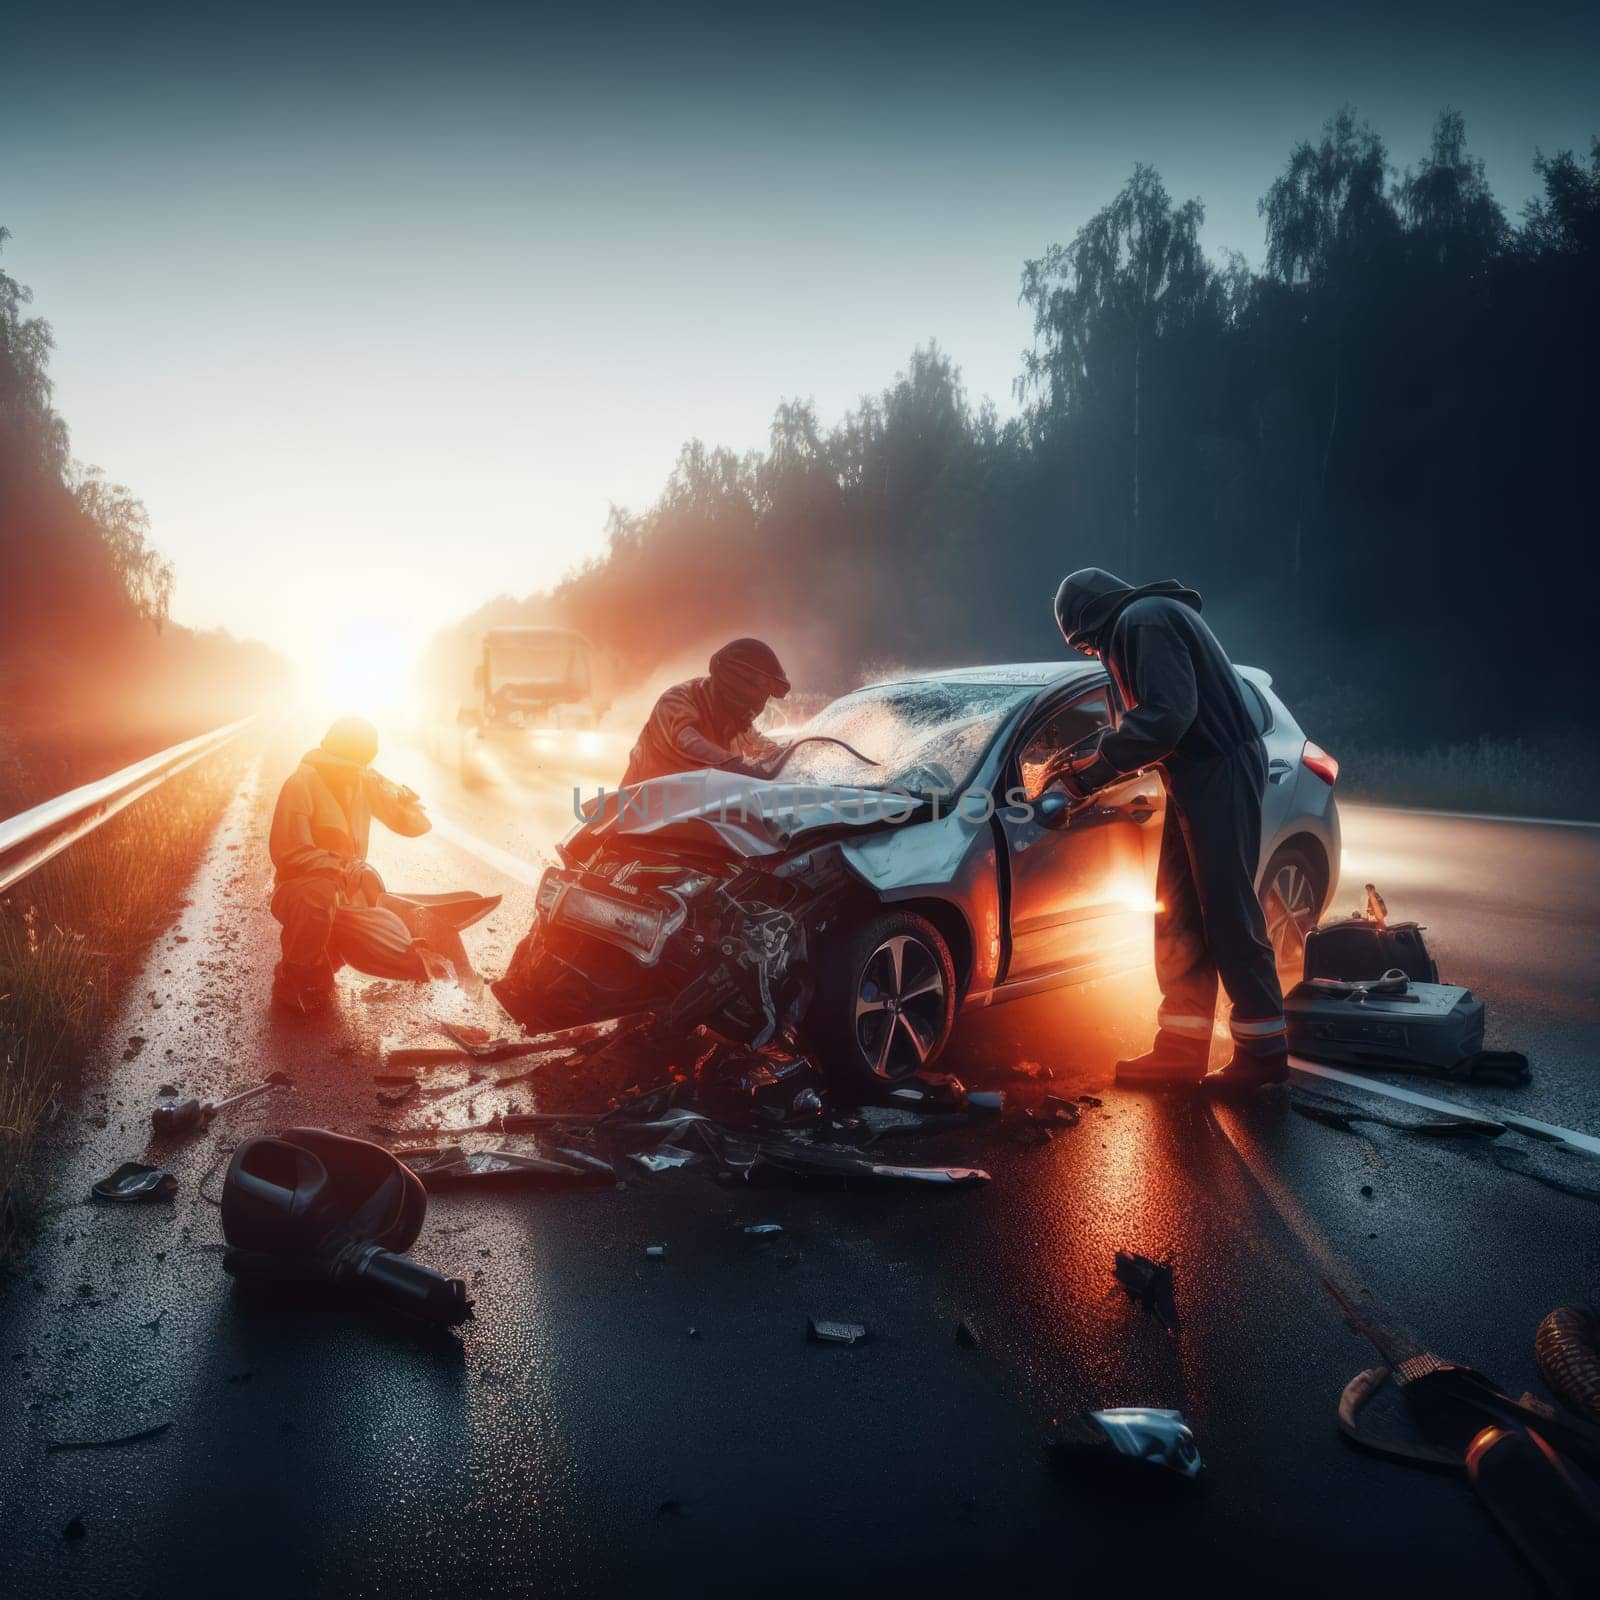 A car accident scene on a highway at dawn, with a severely damaged vehicle and people working on it. by sfinks